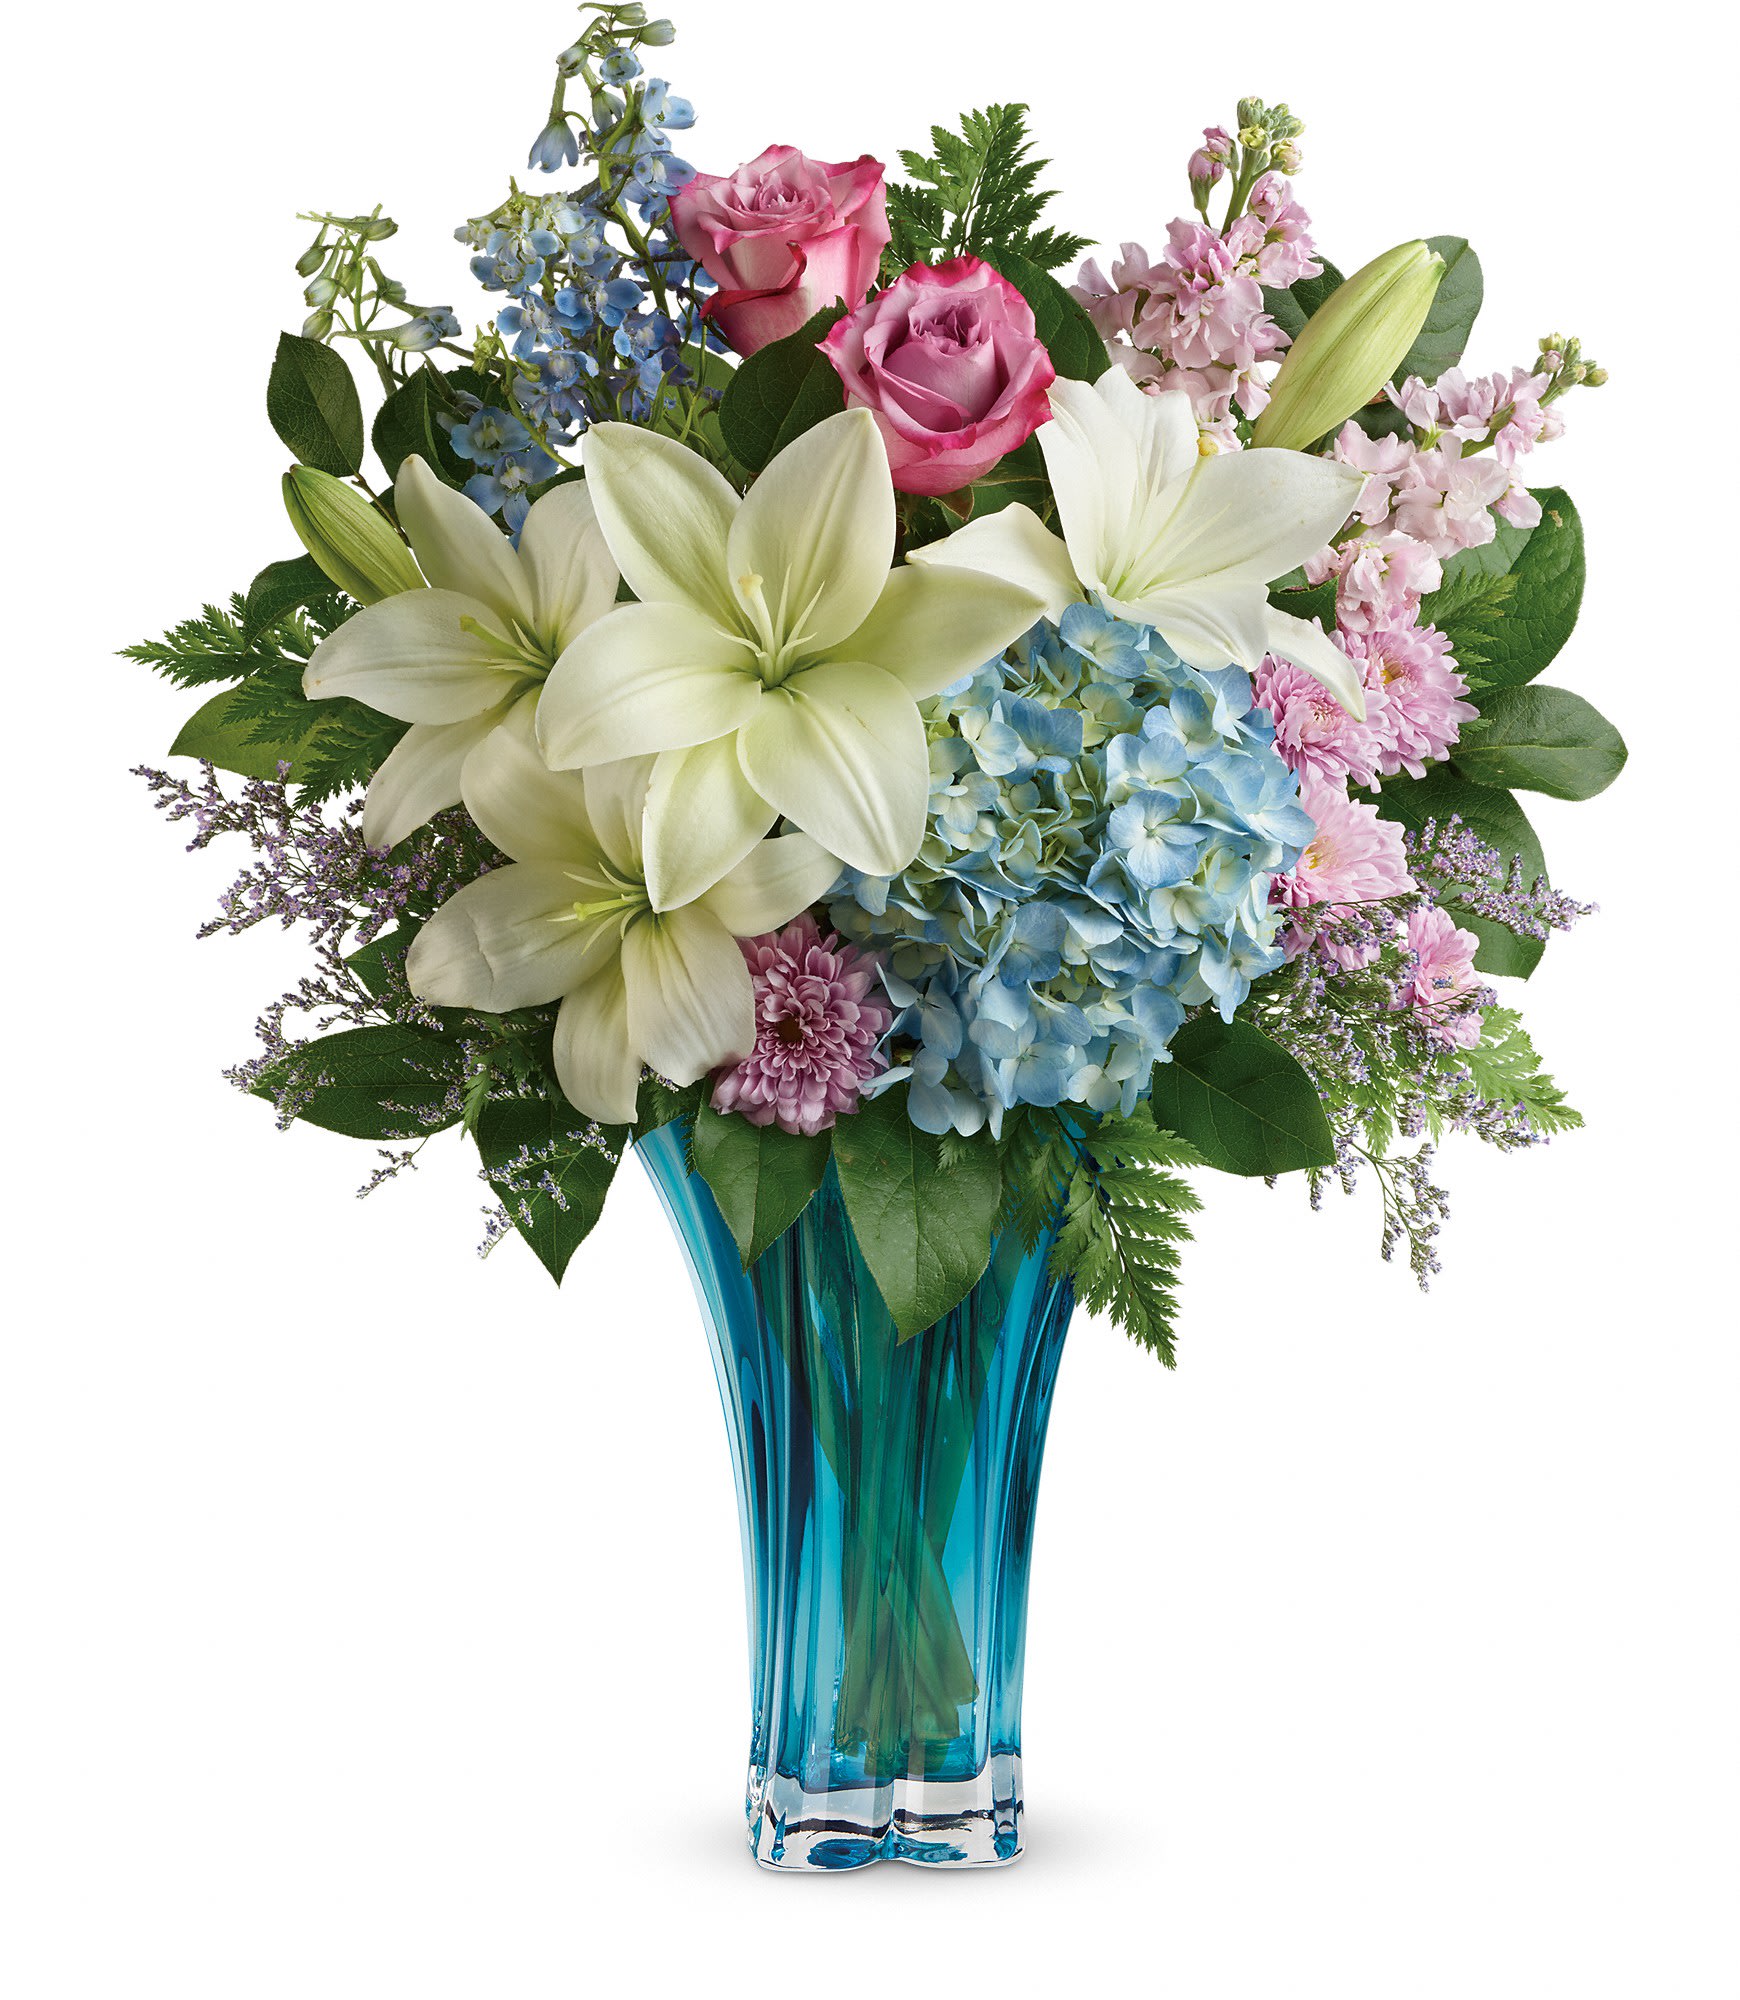 Heart's Pirouette Bouquet - This arrangement features blue hydrangea, lavender roses, white asiatic lilies, light blue delphinium, light pink stock, lavender cushion spray chrysanthemums, leatherleaf fern, and lemon leaf. Delivered in a Heart's Pirouette vase. Approximately 19 1/2&quot; W x 23&quot; H